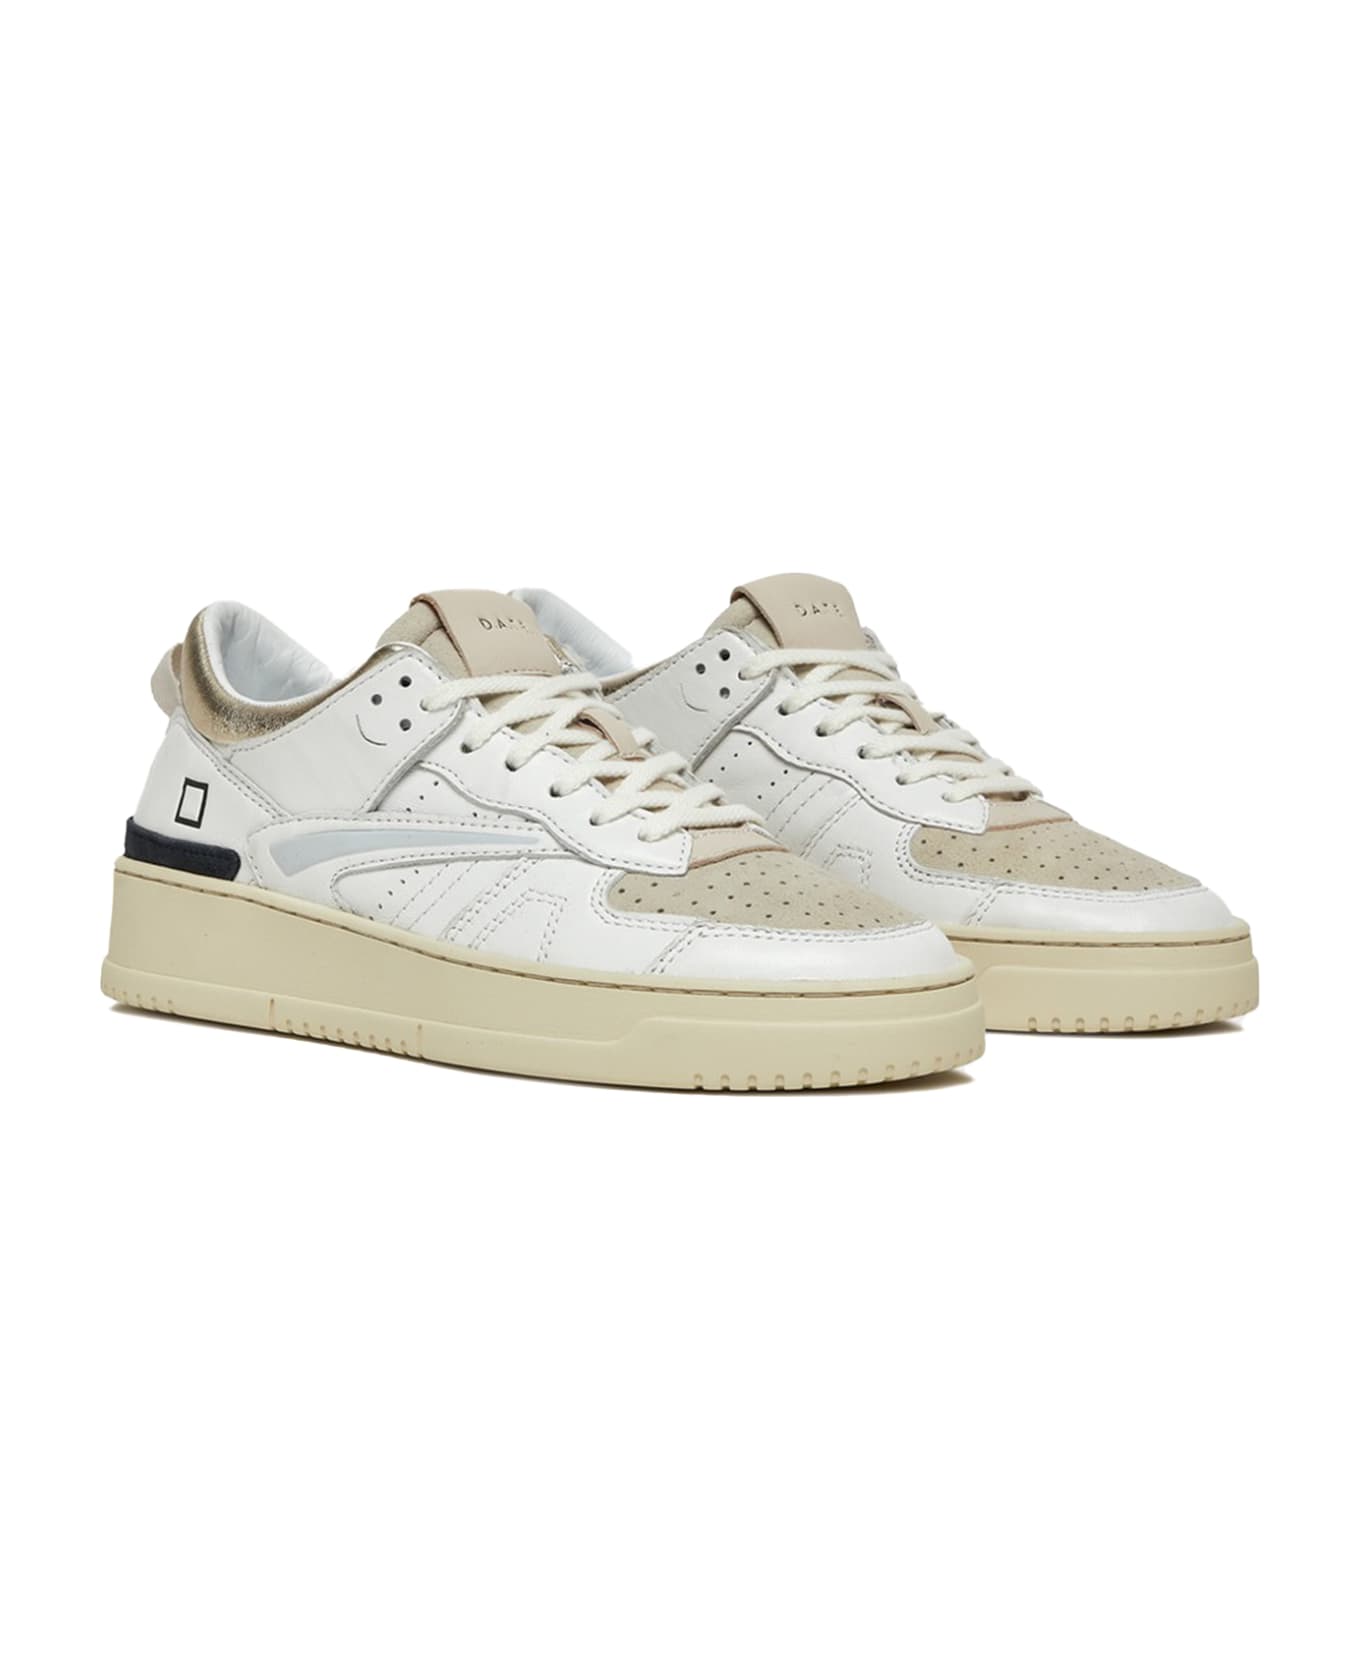 D.A.T.E. Women's Torneo White Gold Leather Sneaker スニーカー